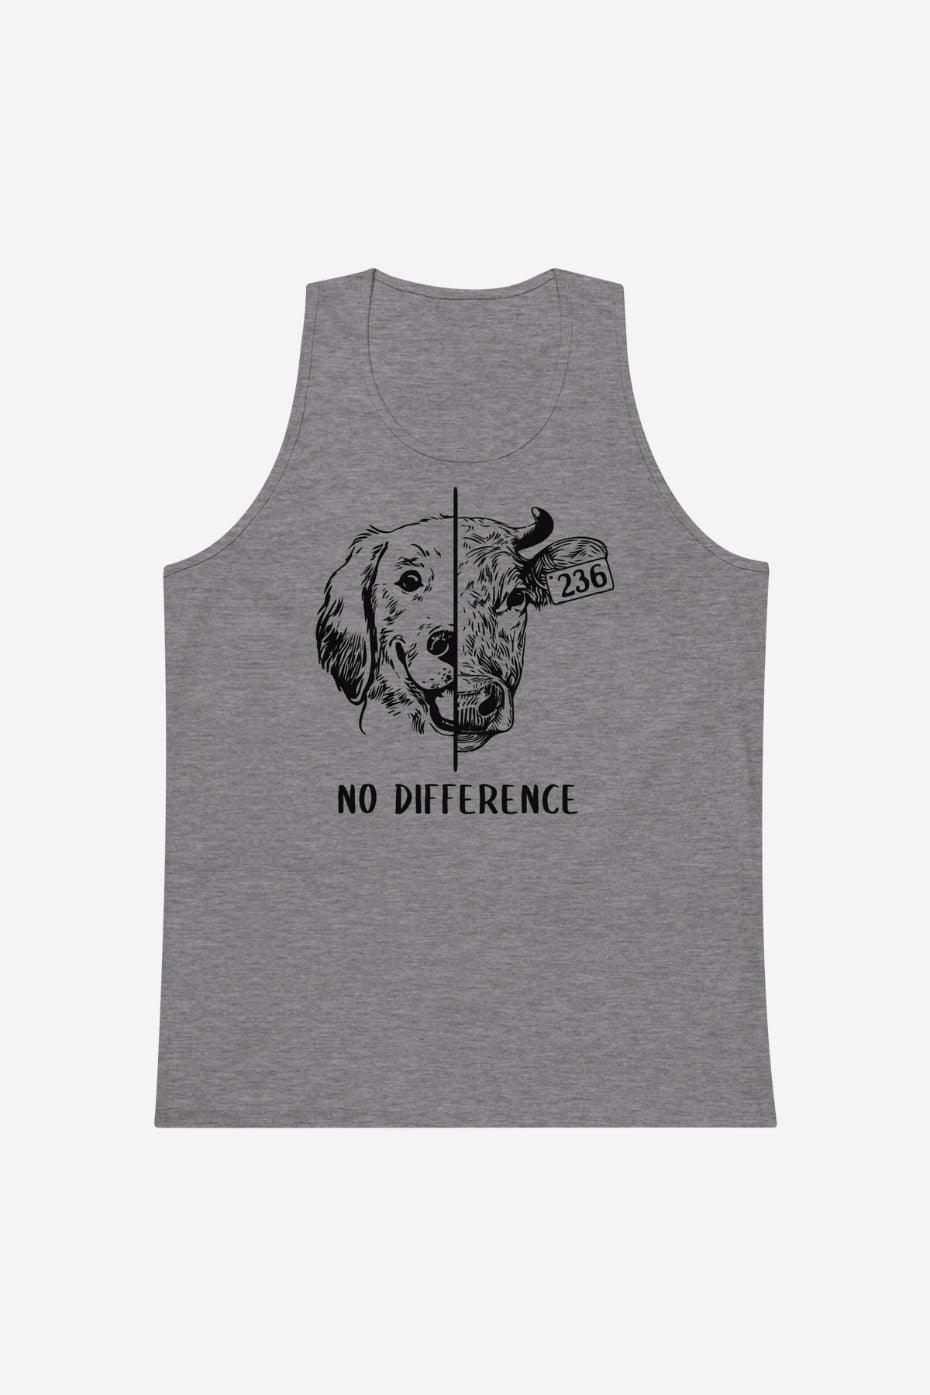 No Difference Men’s premium tank top